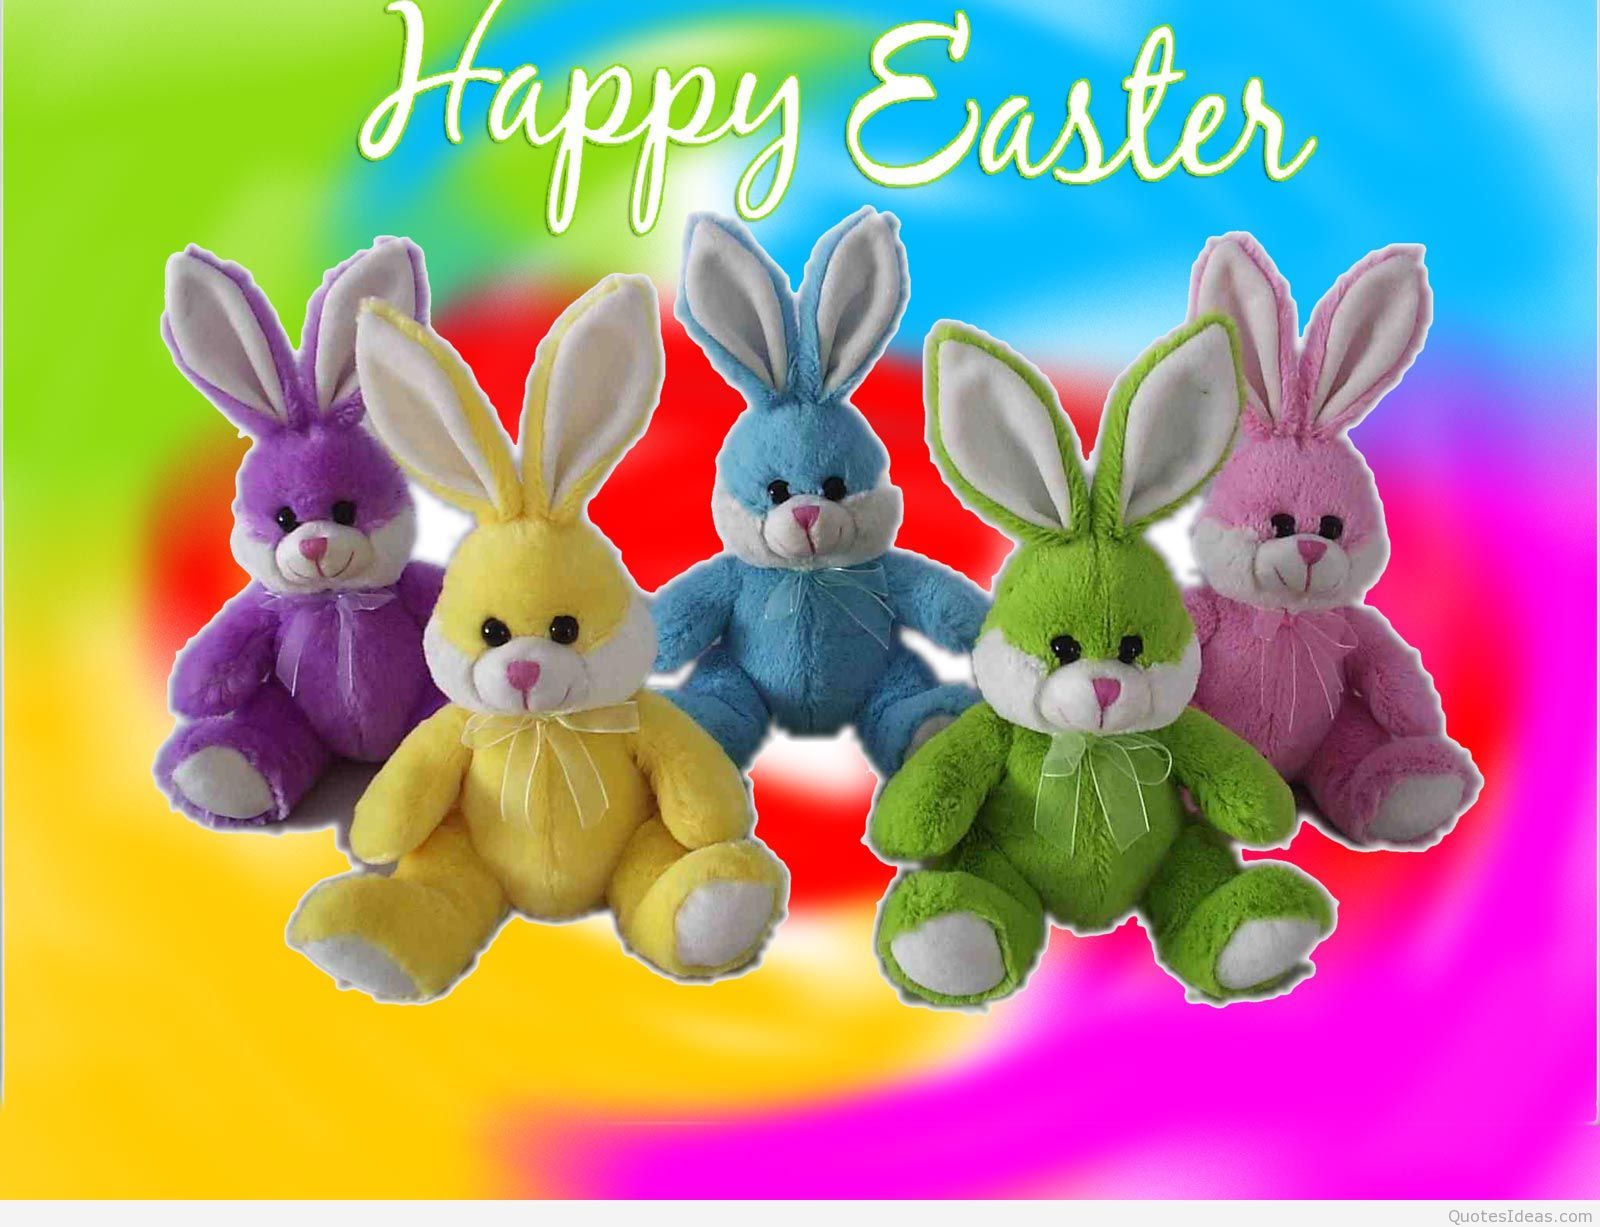 Happy Easter messages wishes 2015